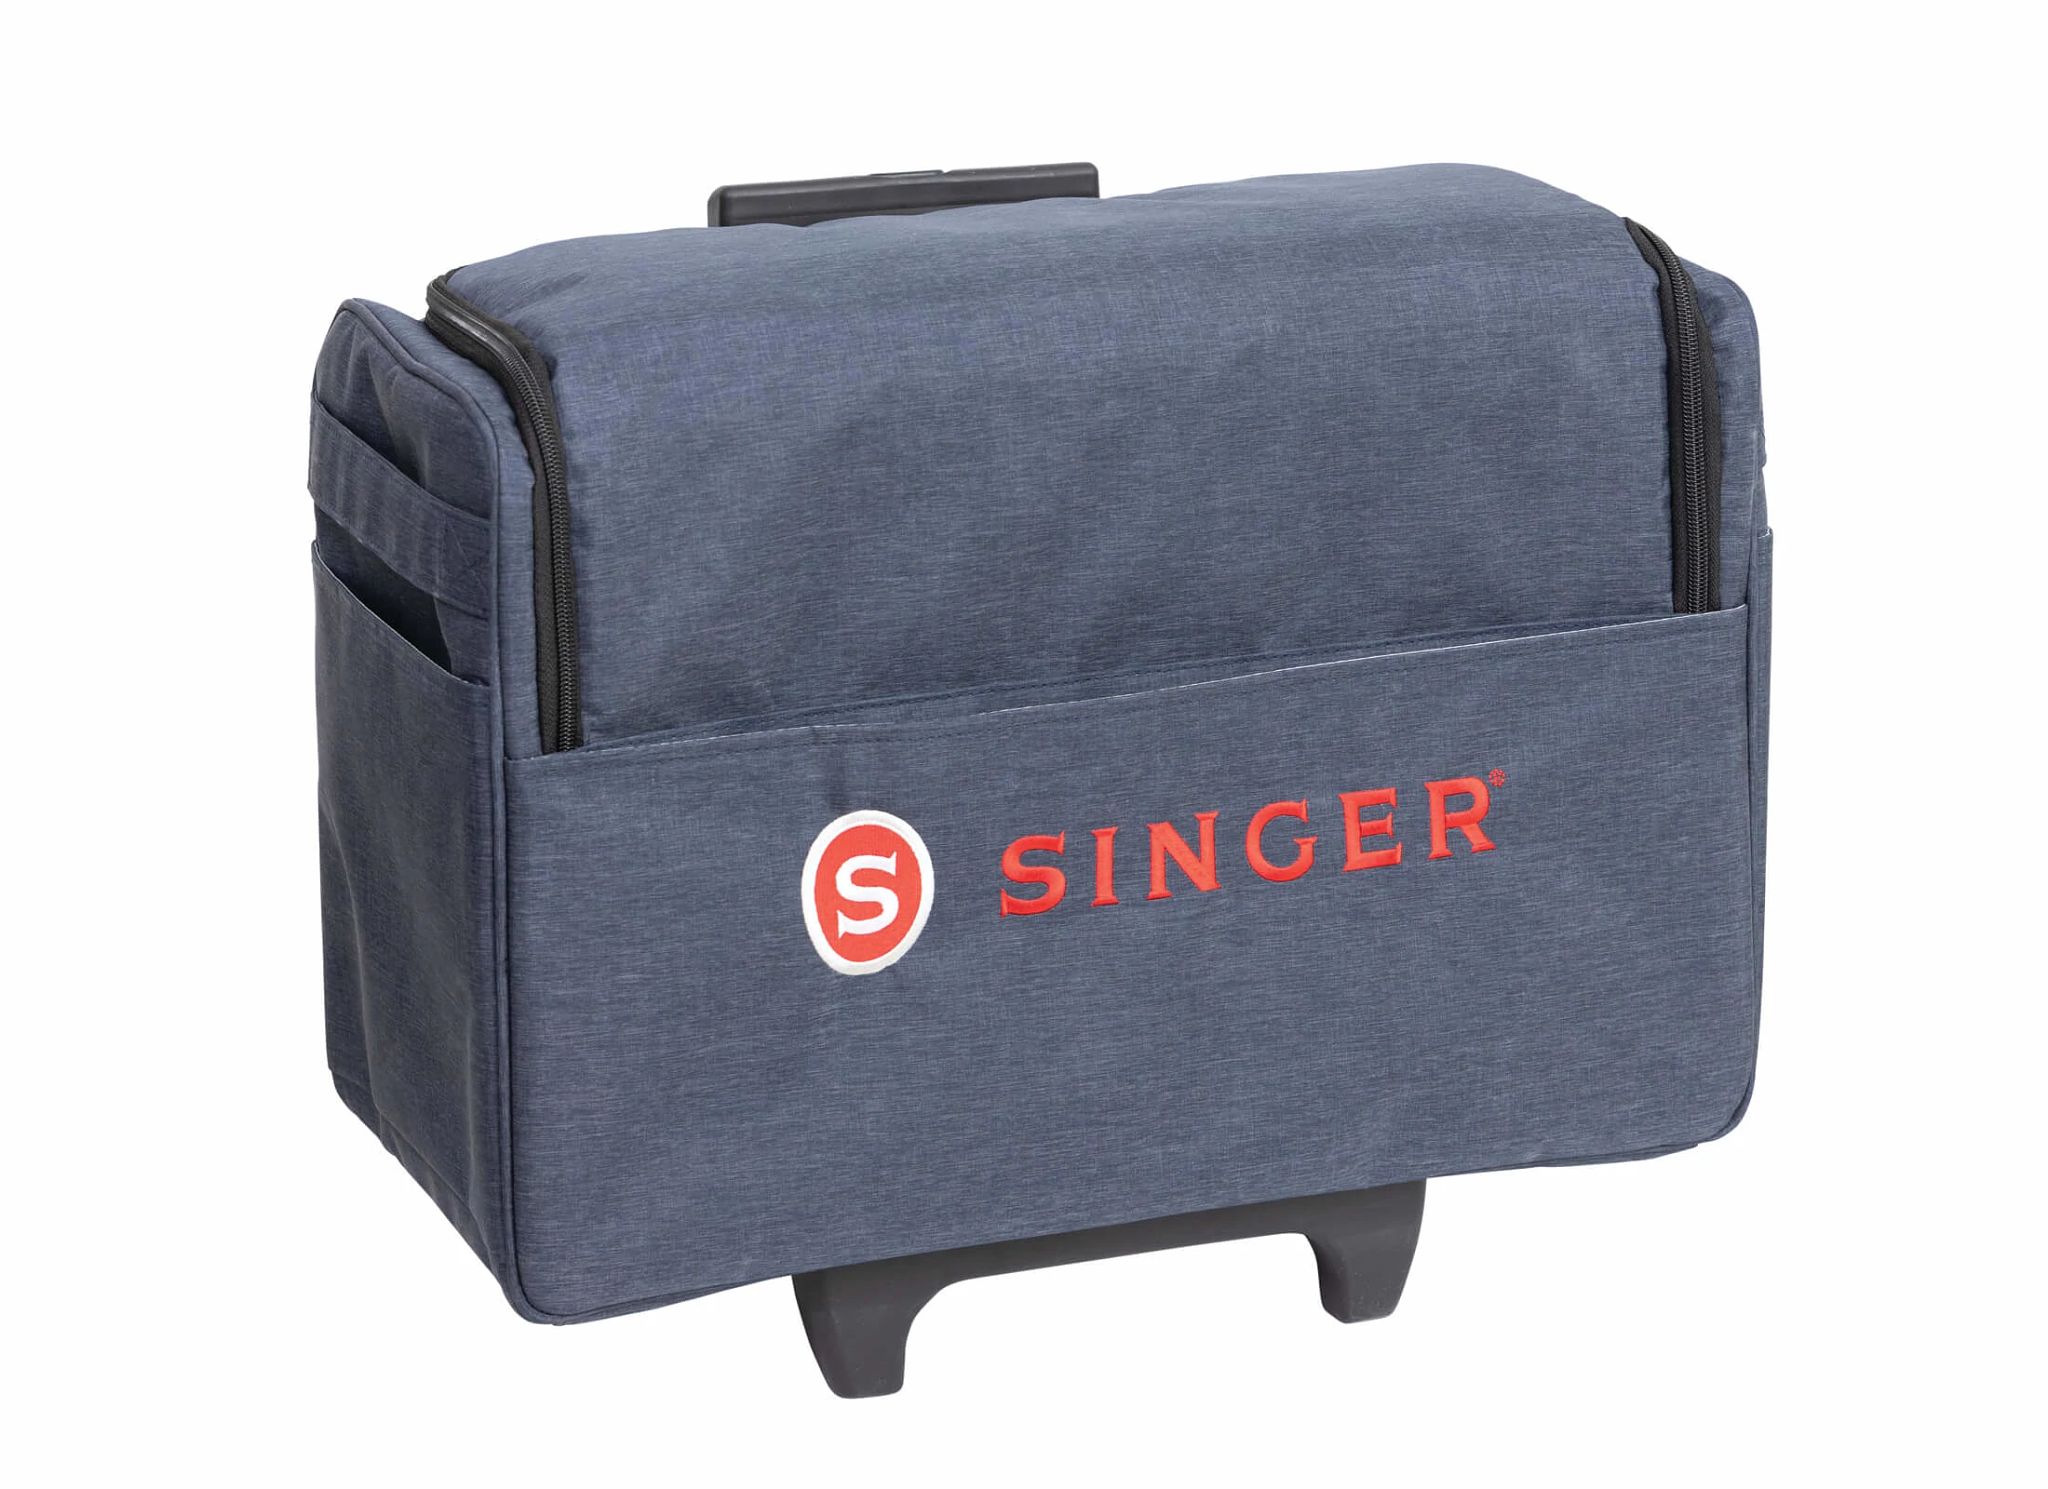 Singer Sewing Machine Soft Carrying Case-Black, 18 X13 X10, 1